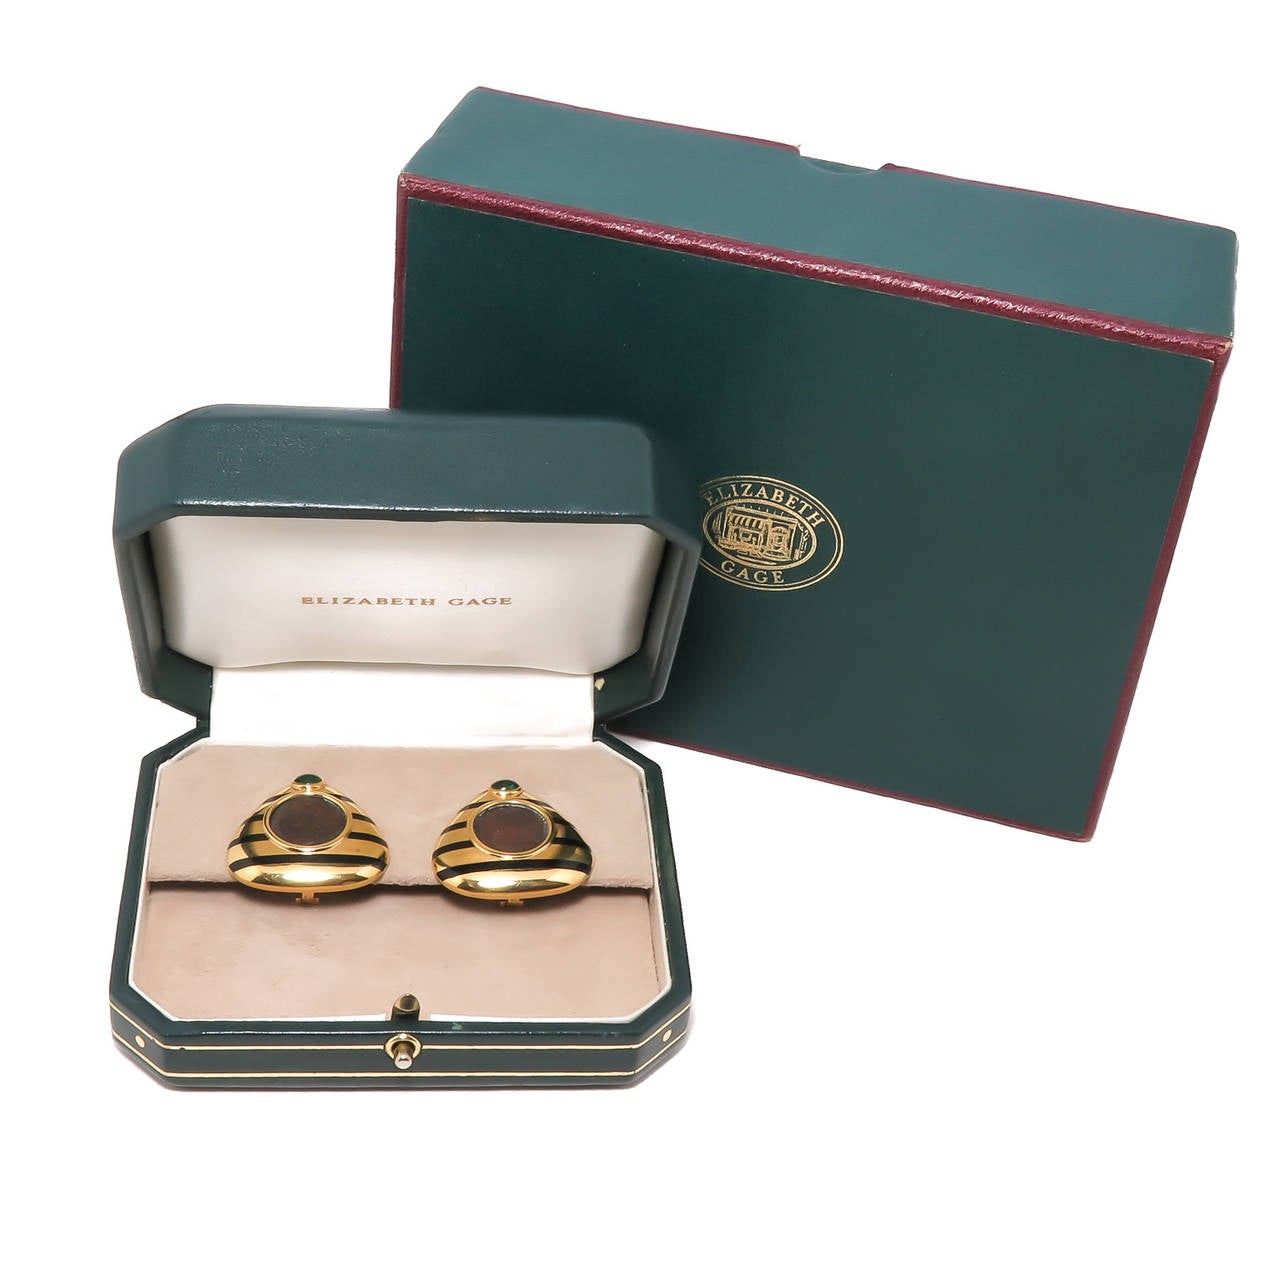 Circa 2000 Elizabeth Gage 18K Yellow Gold Earrings, centrally set with ancient Bronze Coins, further set with Cabochon Emeralds and having Black Enamel. Clip backs to which a post can be easily added. Measuring 1 1/4  X  1 5/16 inch in length.